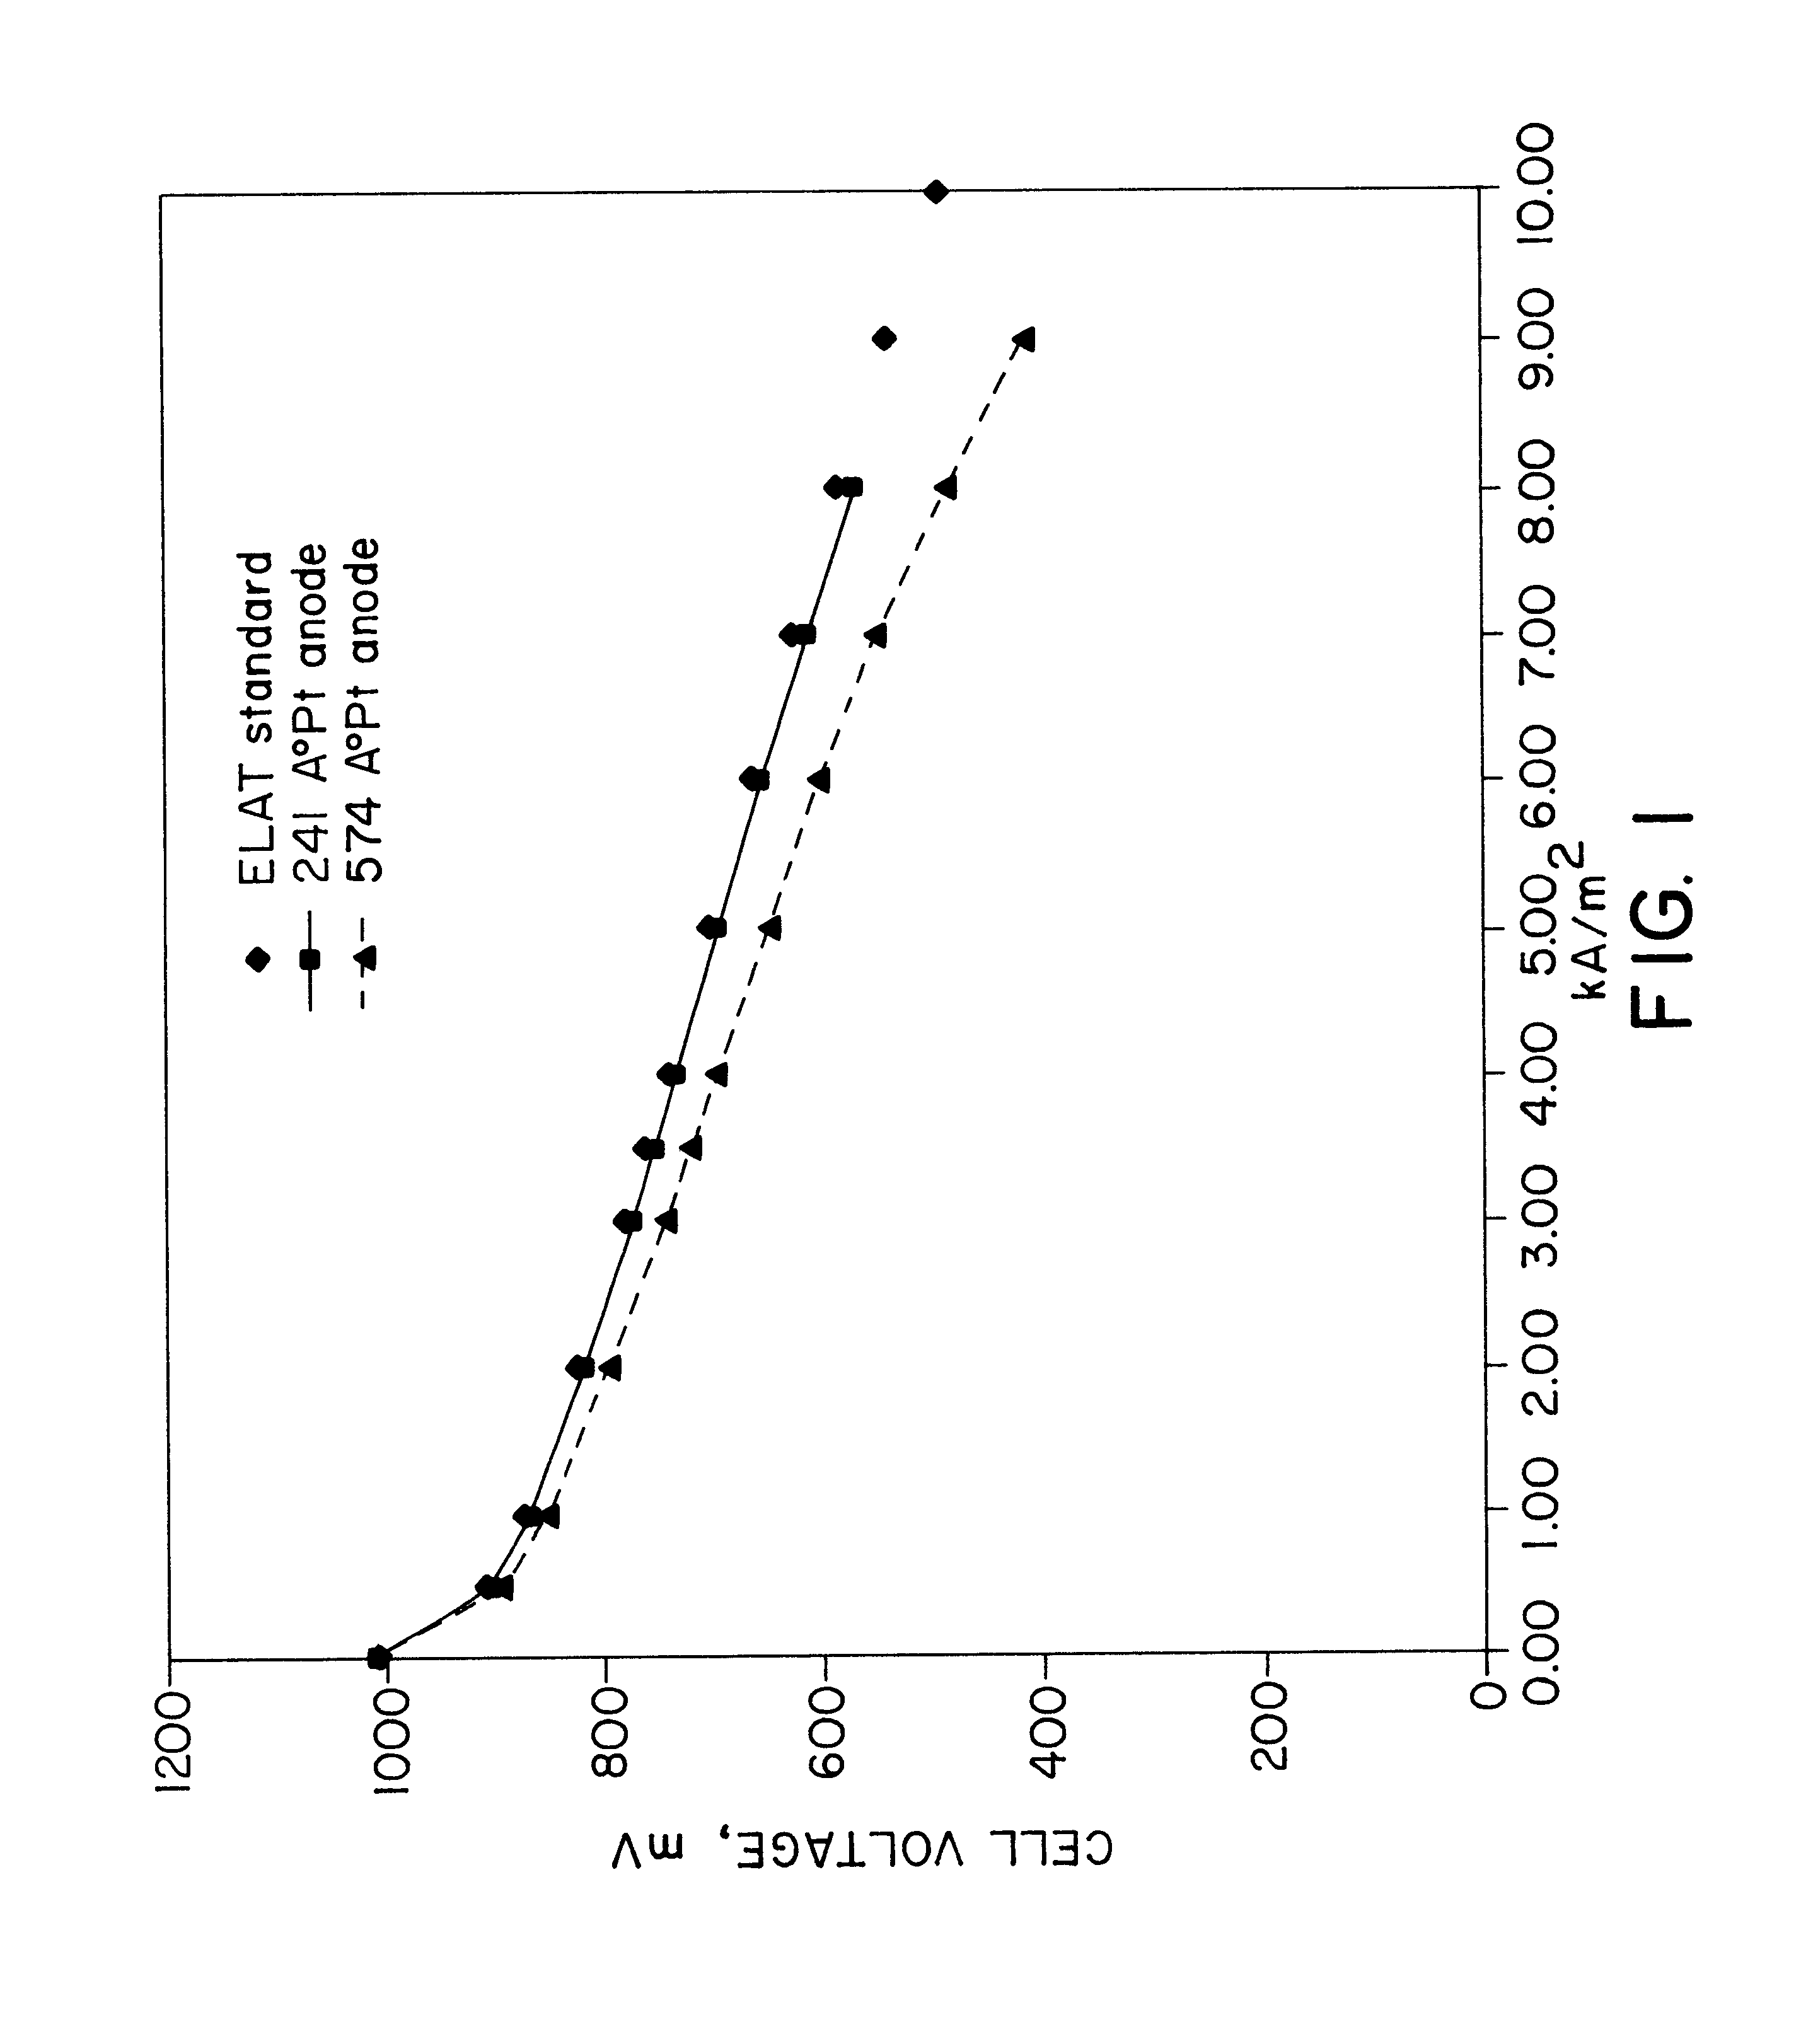 Method of forming robust metal, metal oxide, and metal alloy layers on ion-conductive polymer membranes